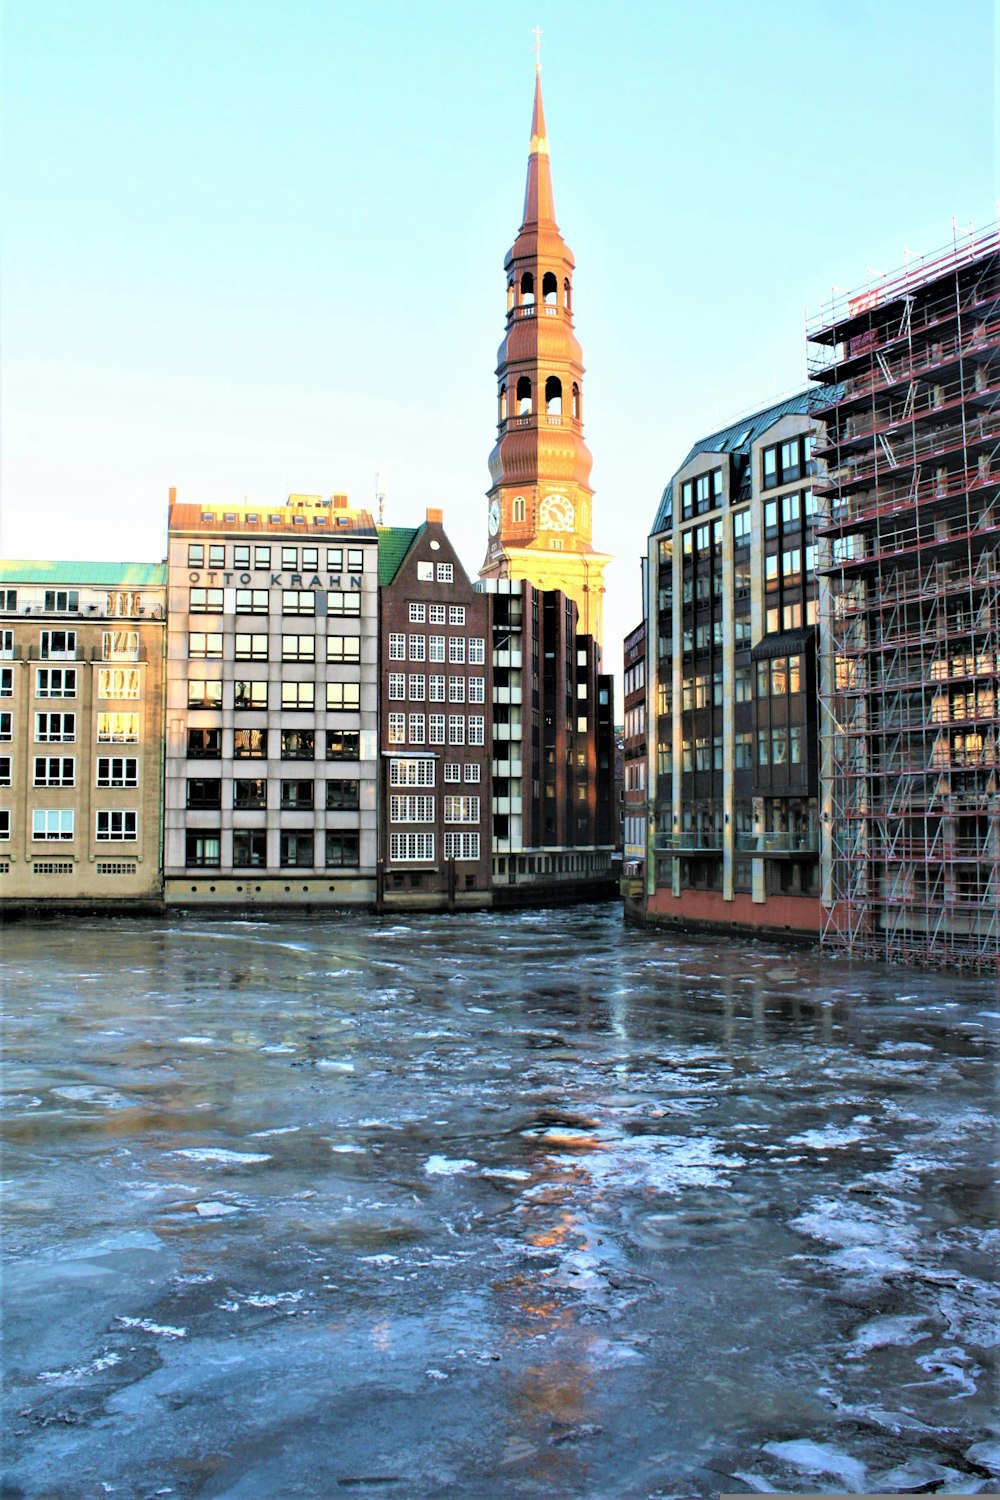 a clock tower towering over a city with ice on the water